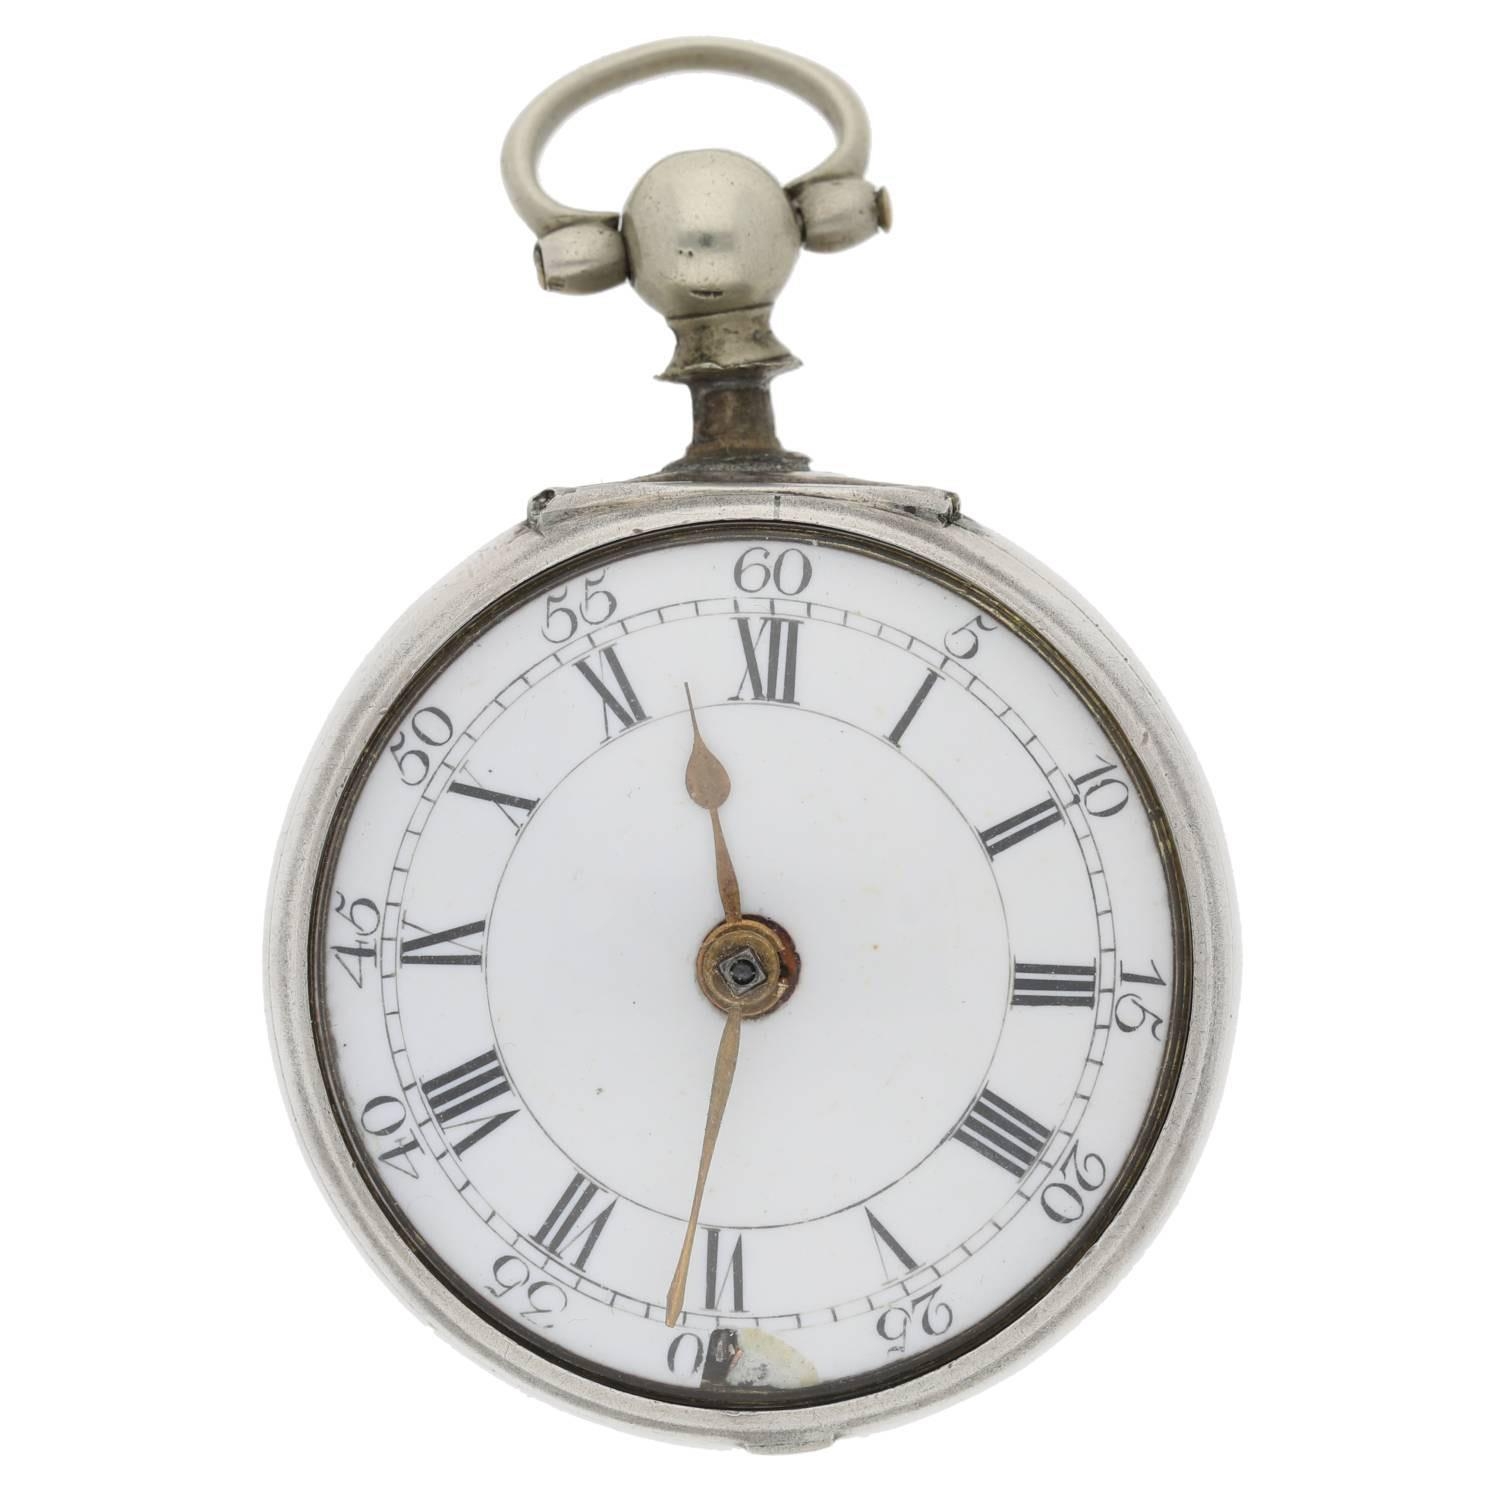 James Mew, London - English mid-18th century silver pair cased verge pocket watch, London 1758, - Image 3 of 7